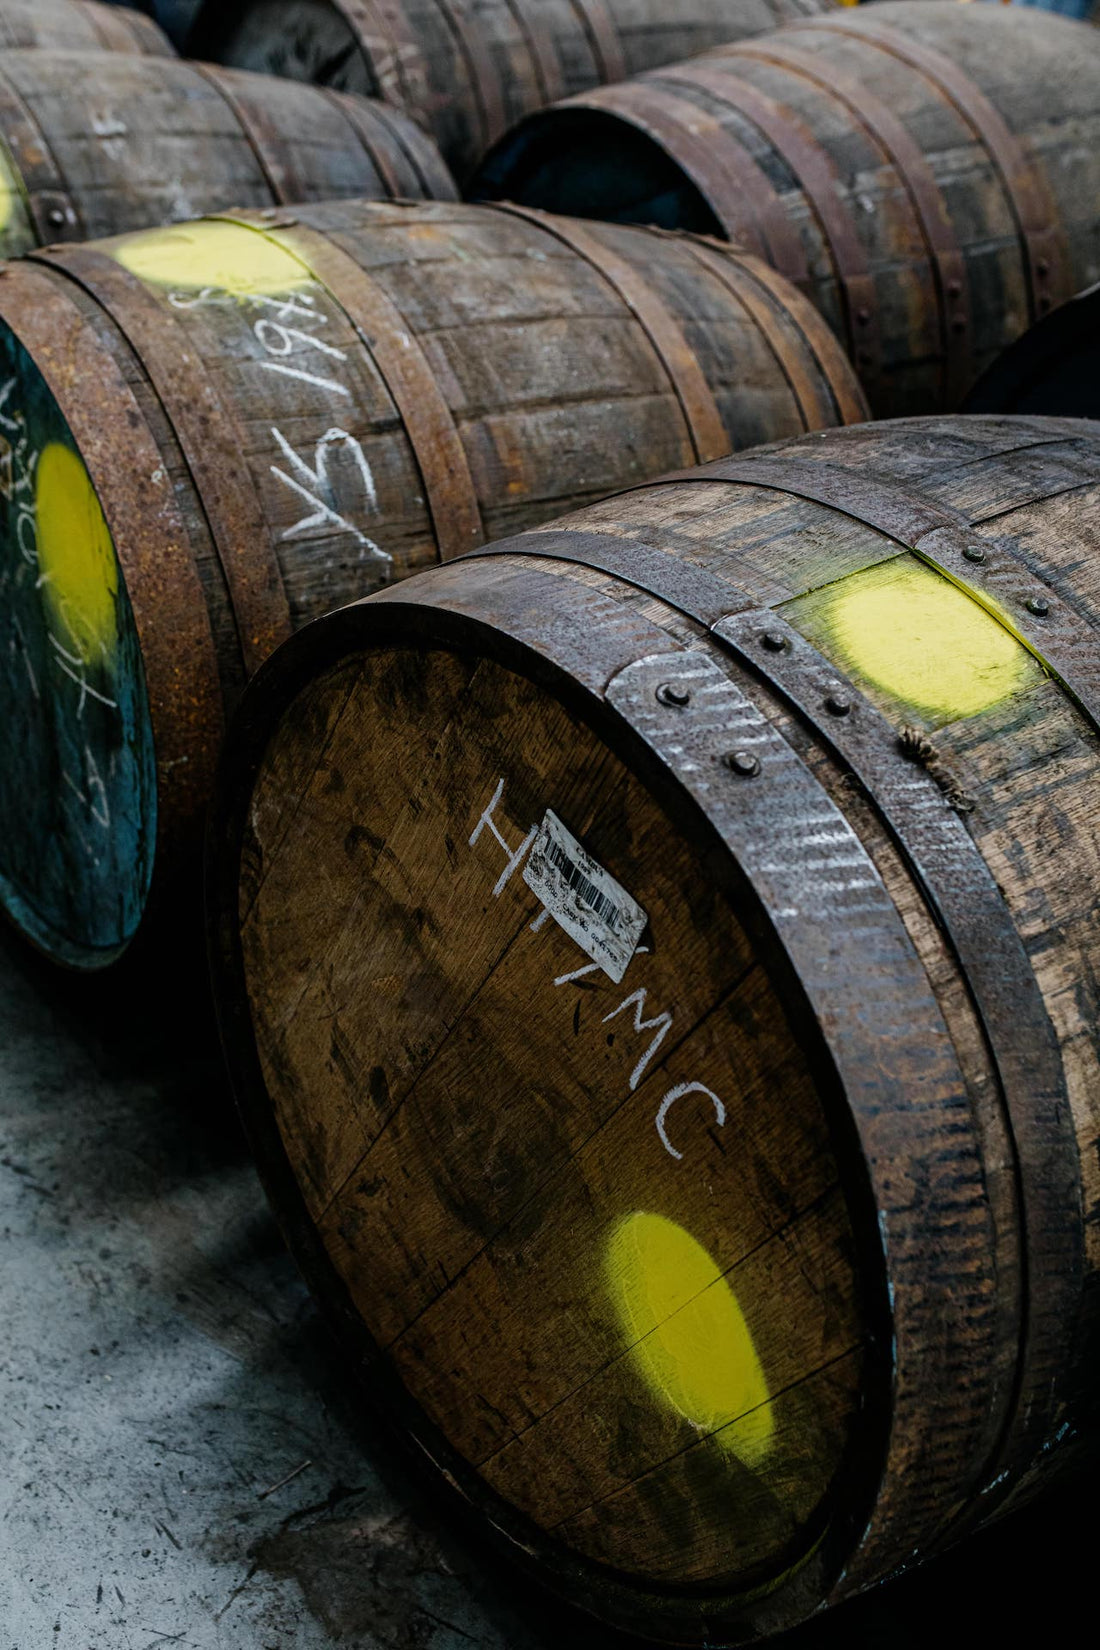 HOW IS RUM AGED AND BLENDED?